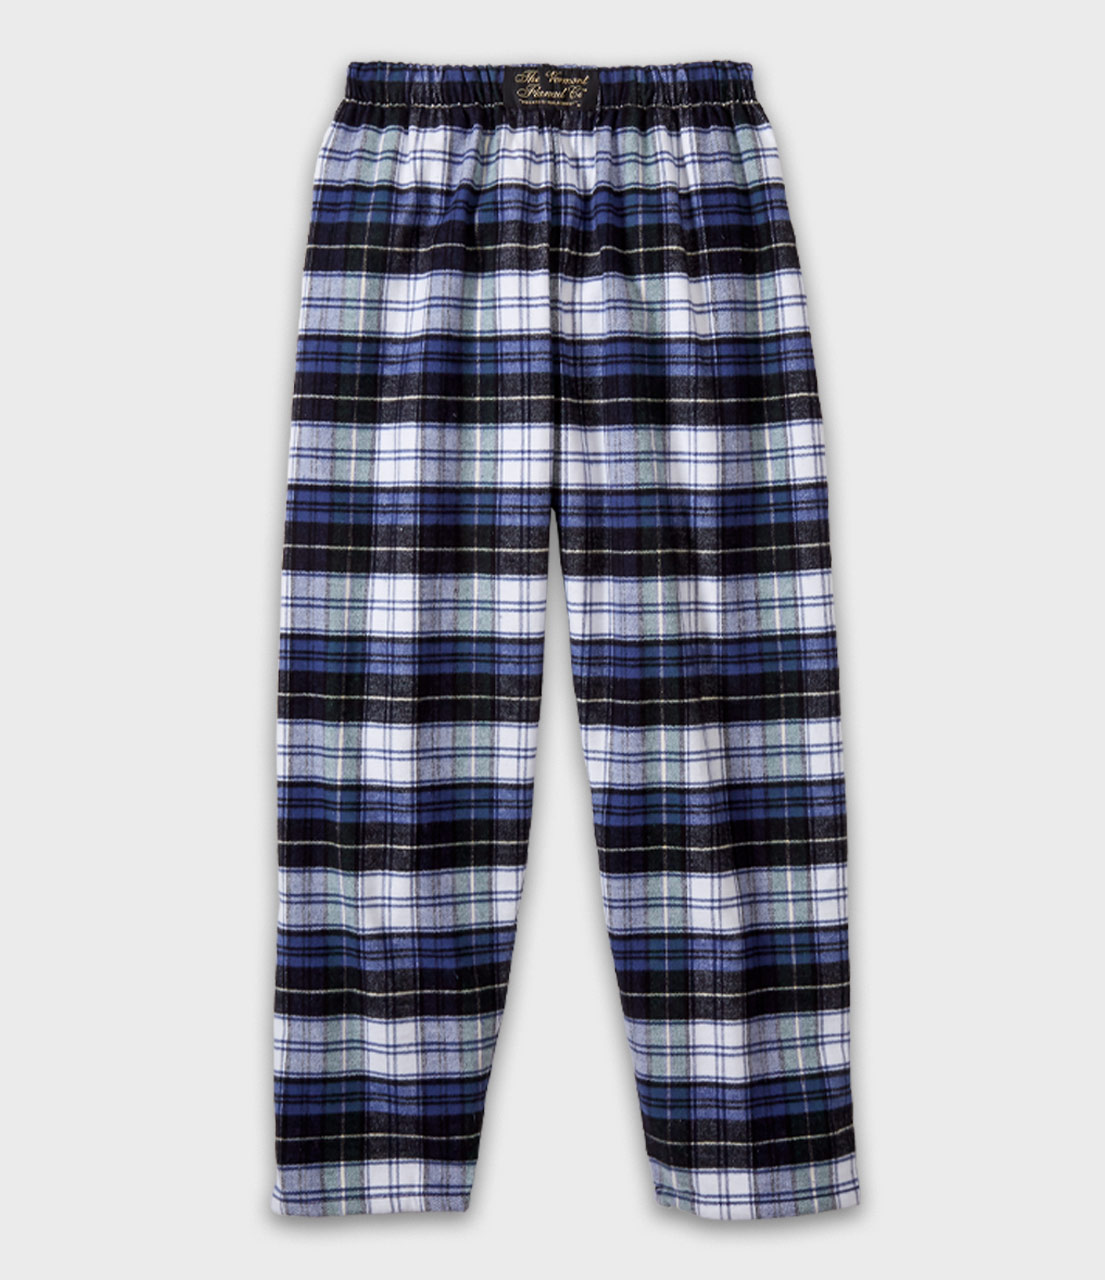 Kids Flannel Pants  Handcrafted USA - The Vermont Flannel Co.